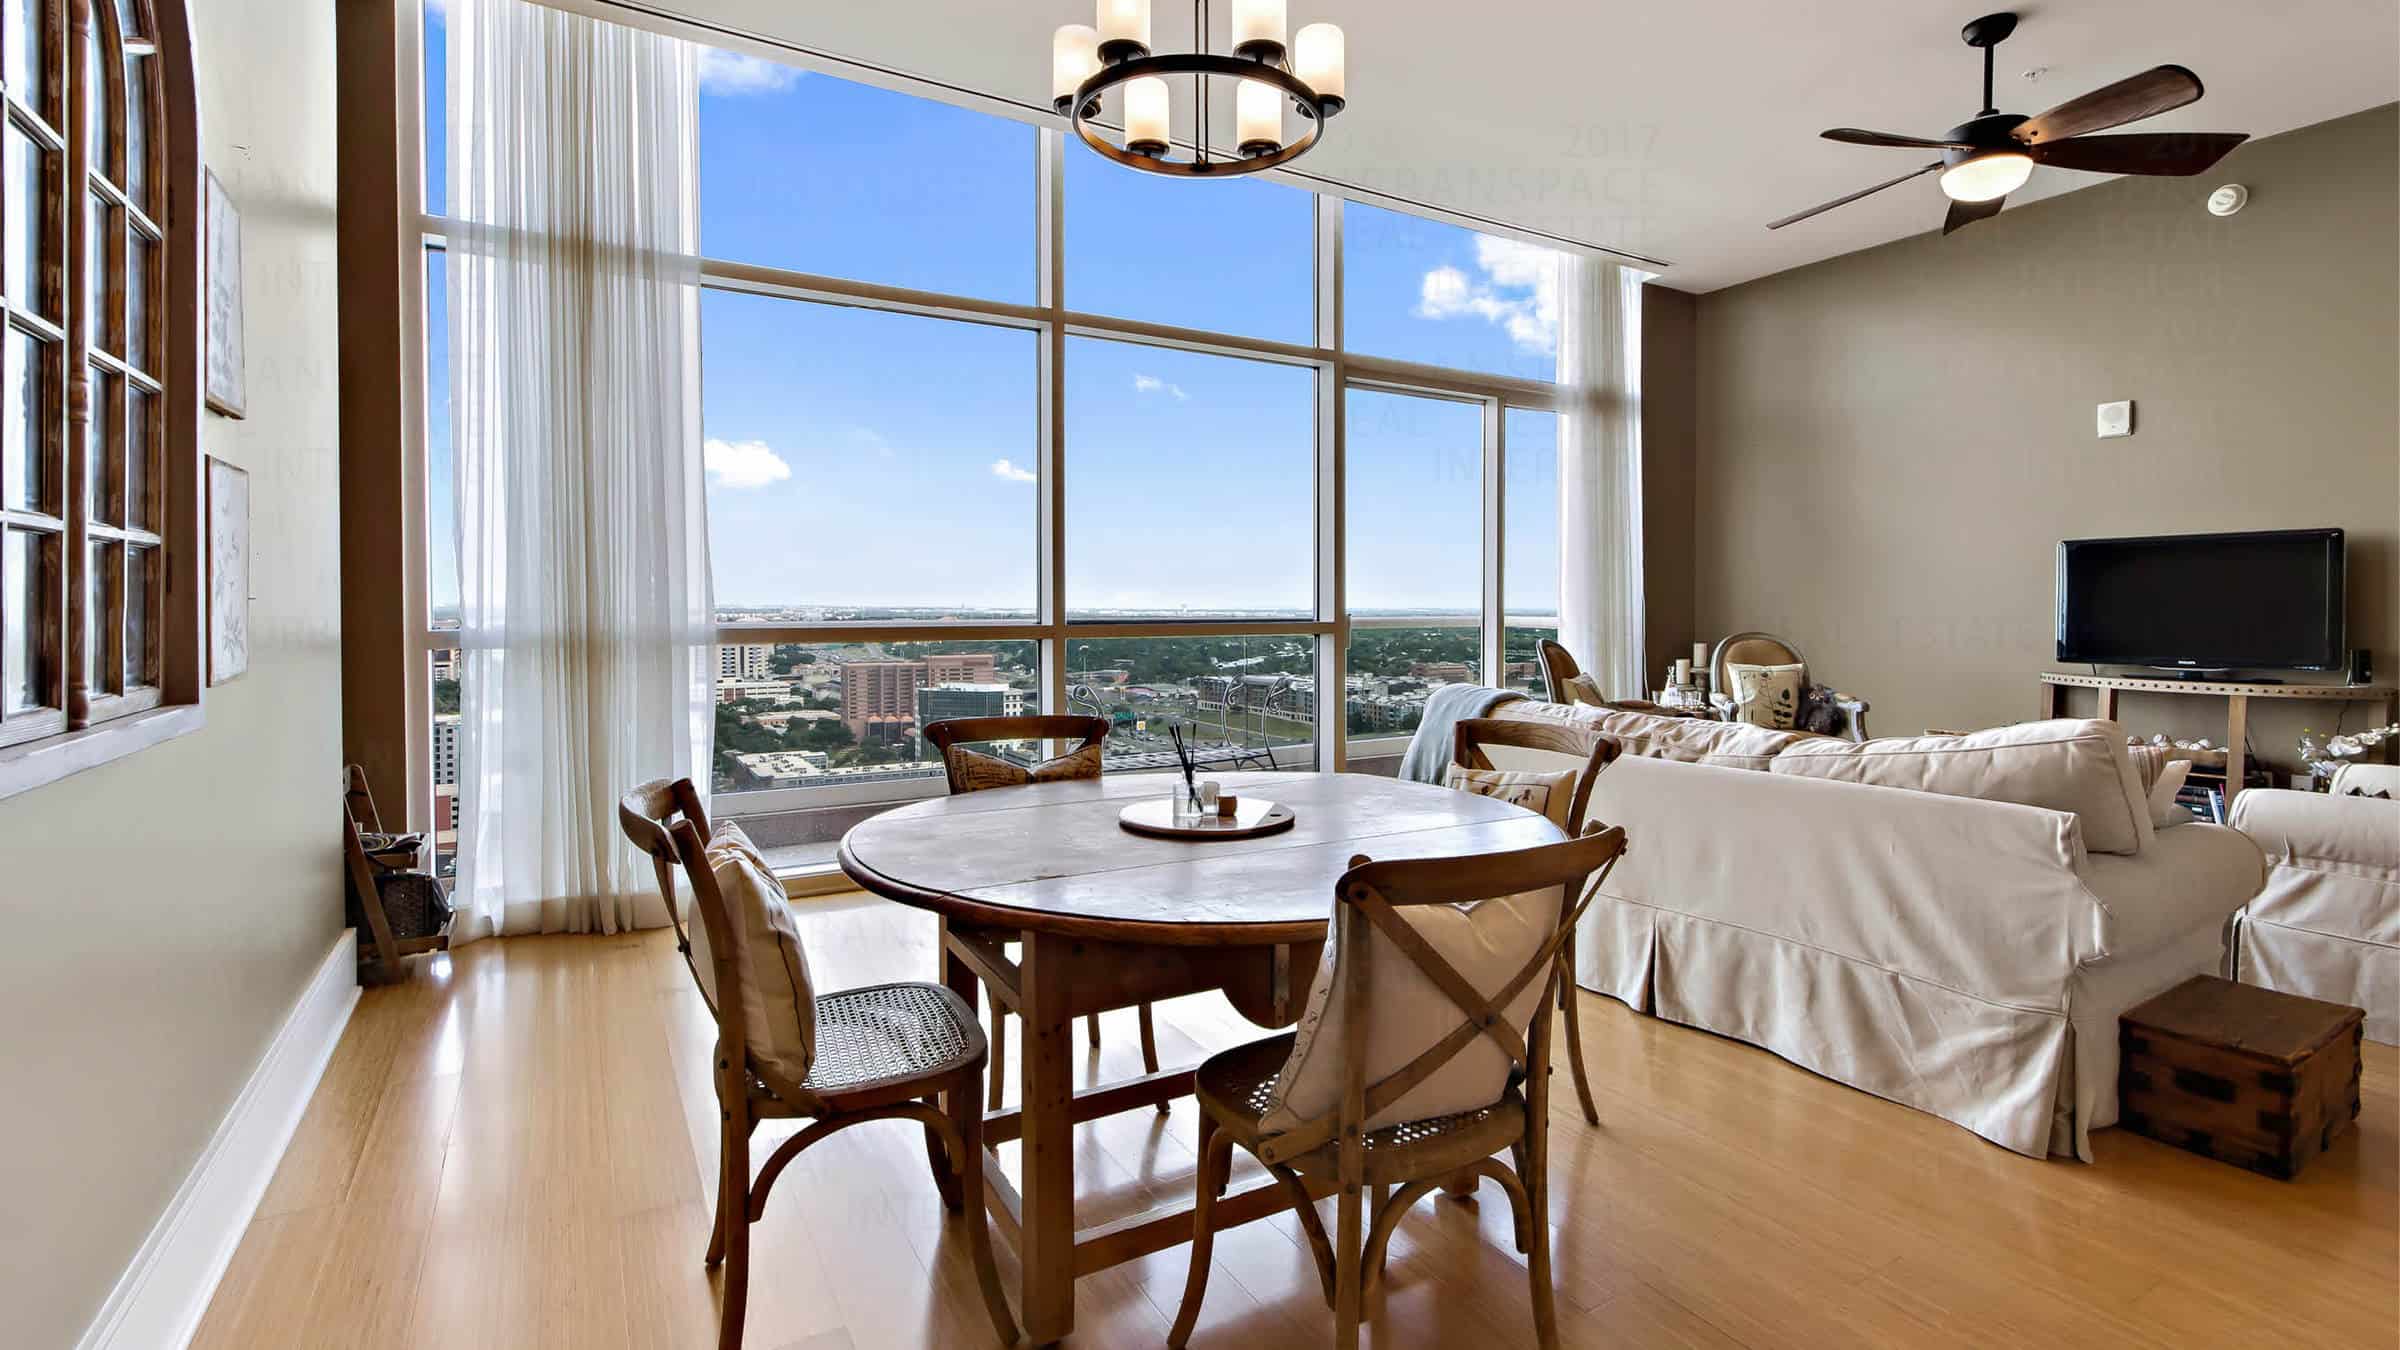 5 fifty five condo window natural light table area downtown austin